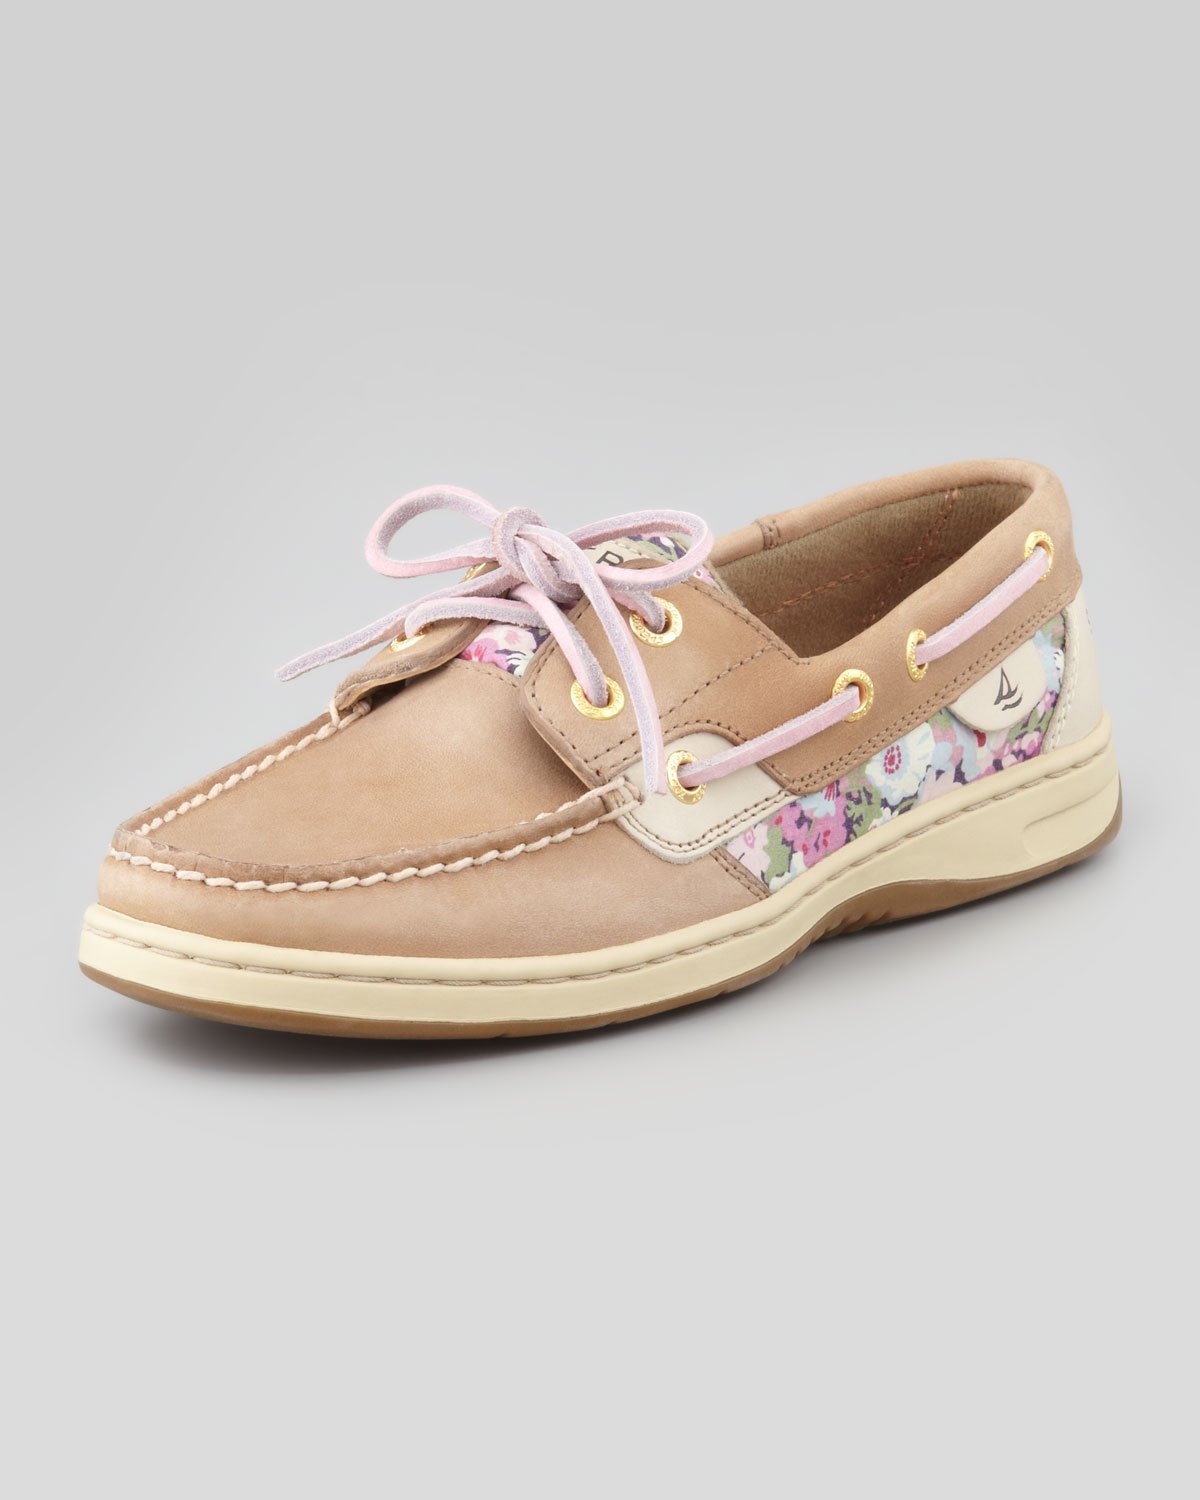 Sperry Top Sider Shoes Women